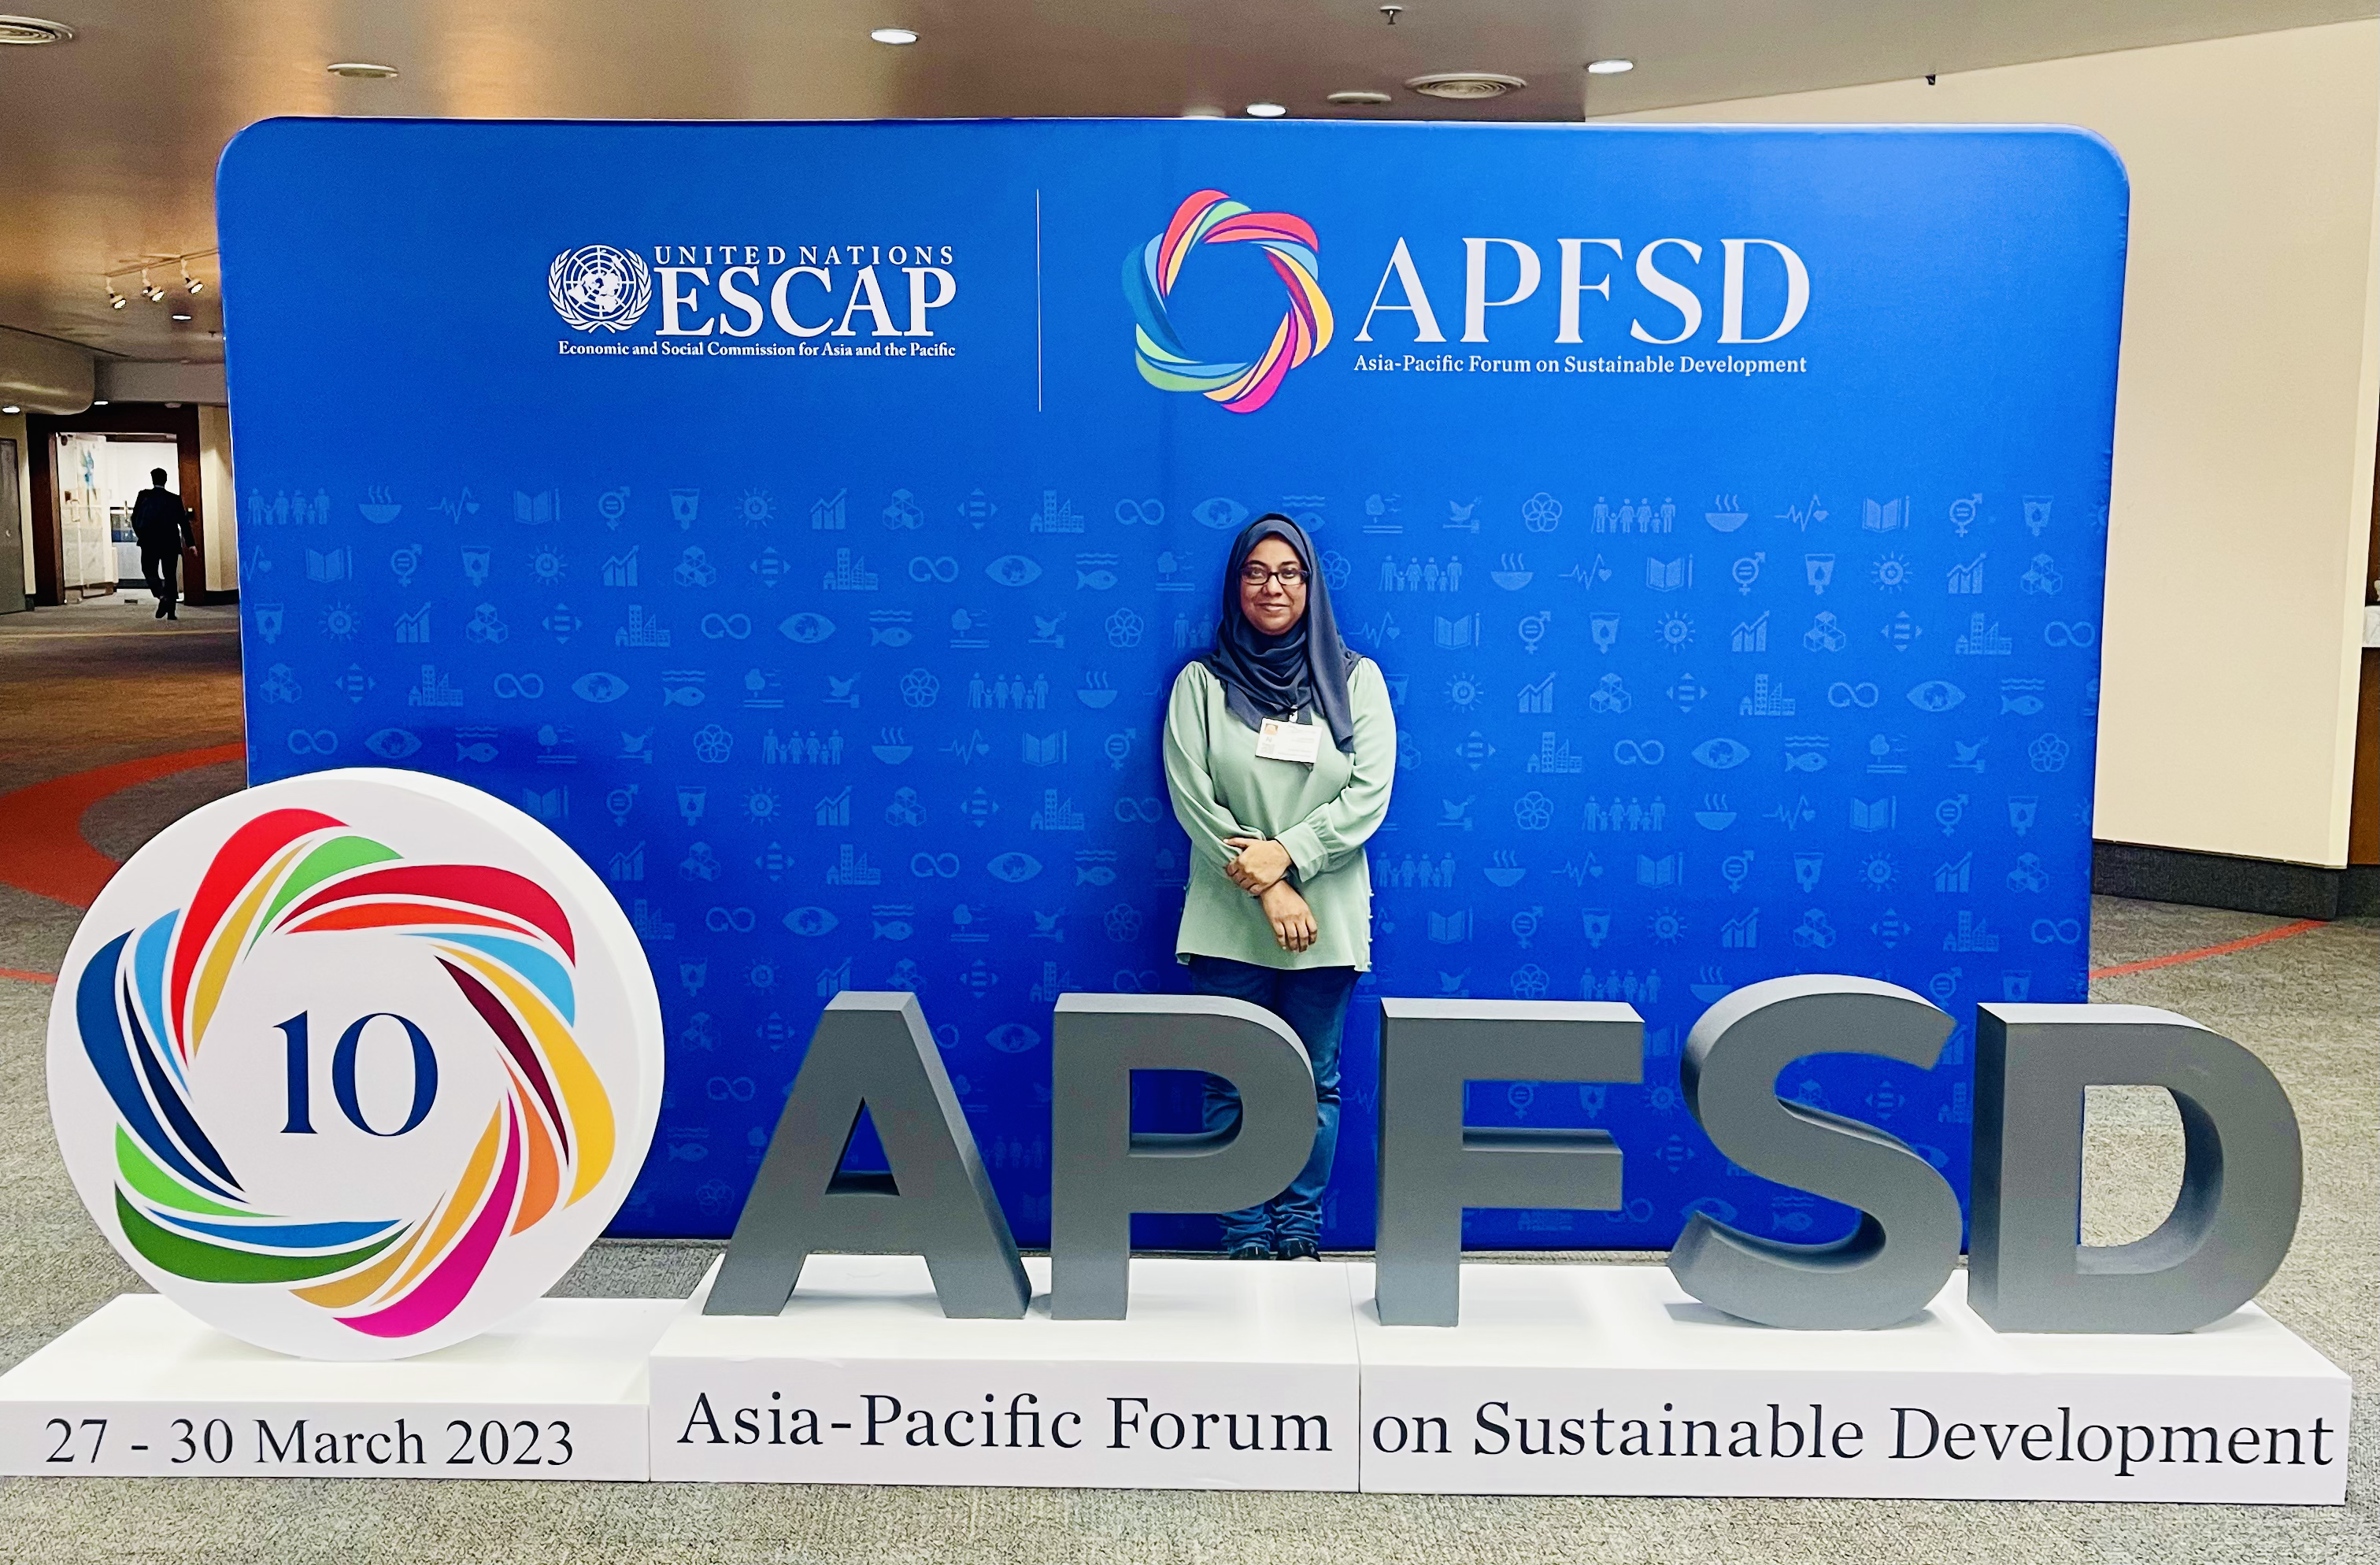 IFLA representative Fathimath Nashfa standing behind a 10th Asia-Pacific Forum on Sustainable Development logo, with a blue background